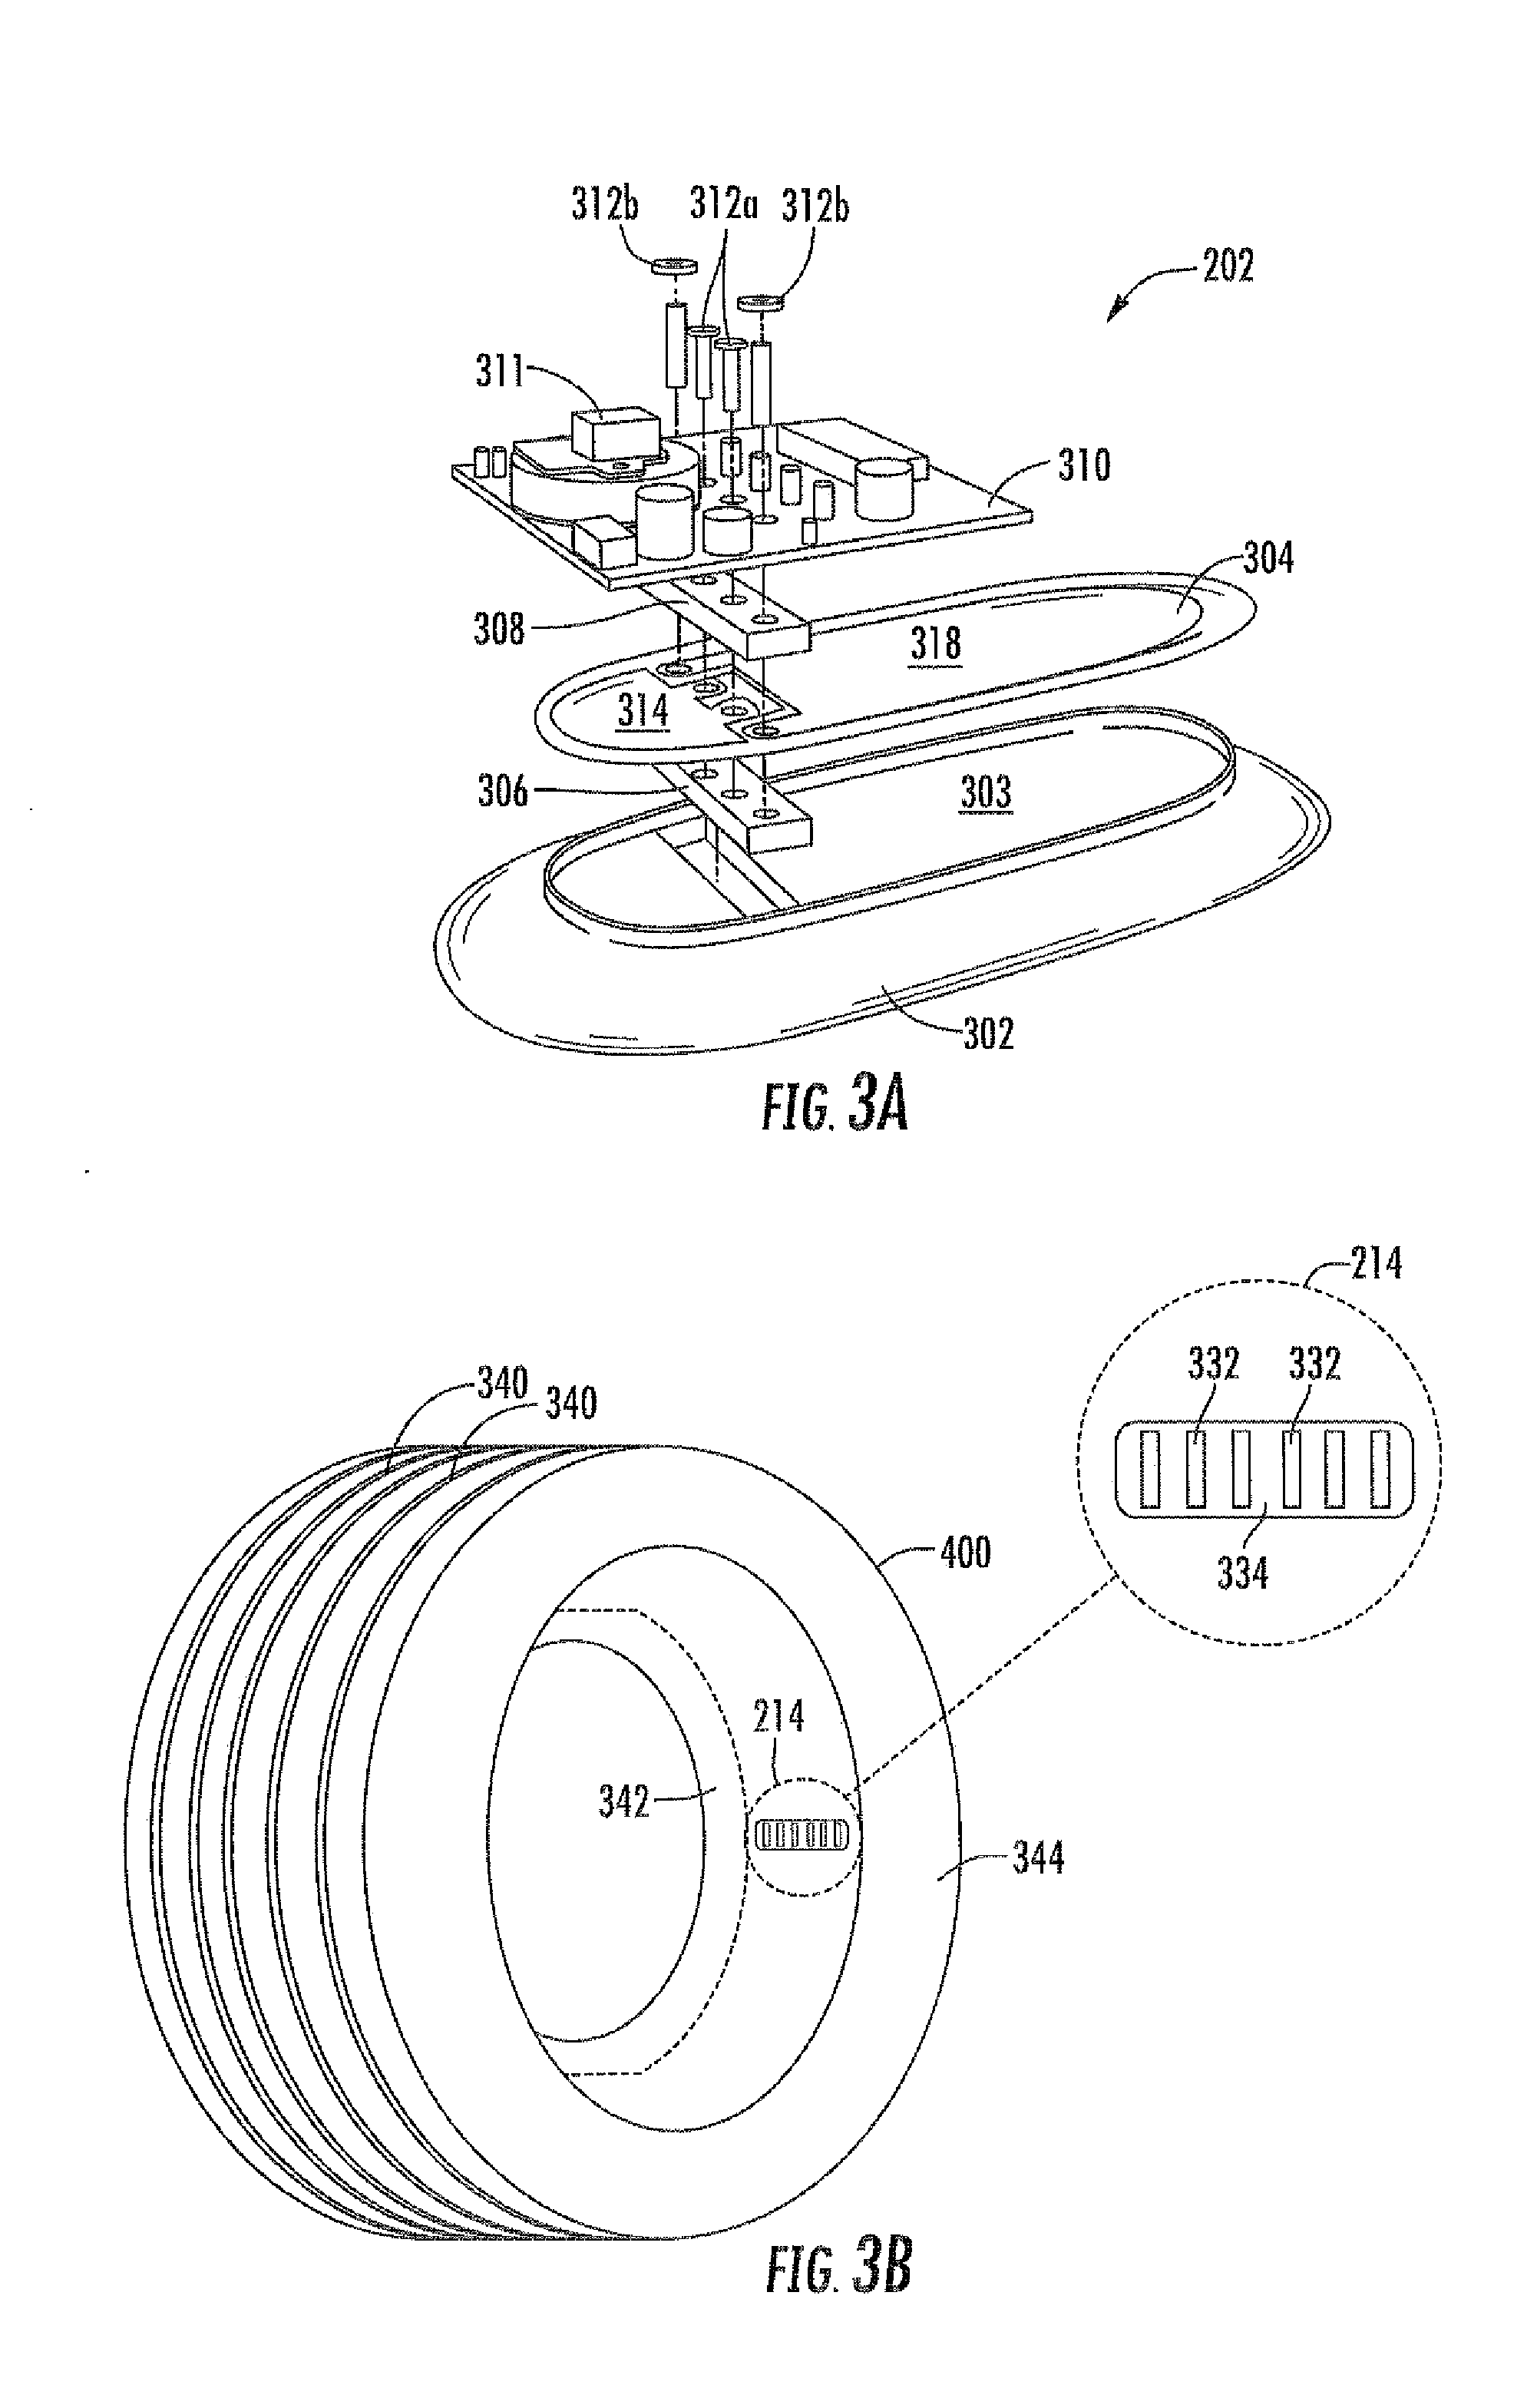 Piezoelectric based system and method for determining tire load